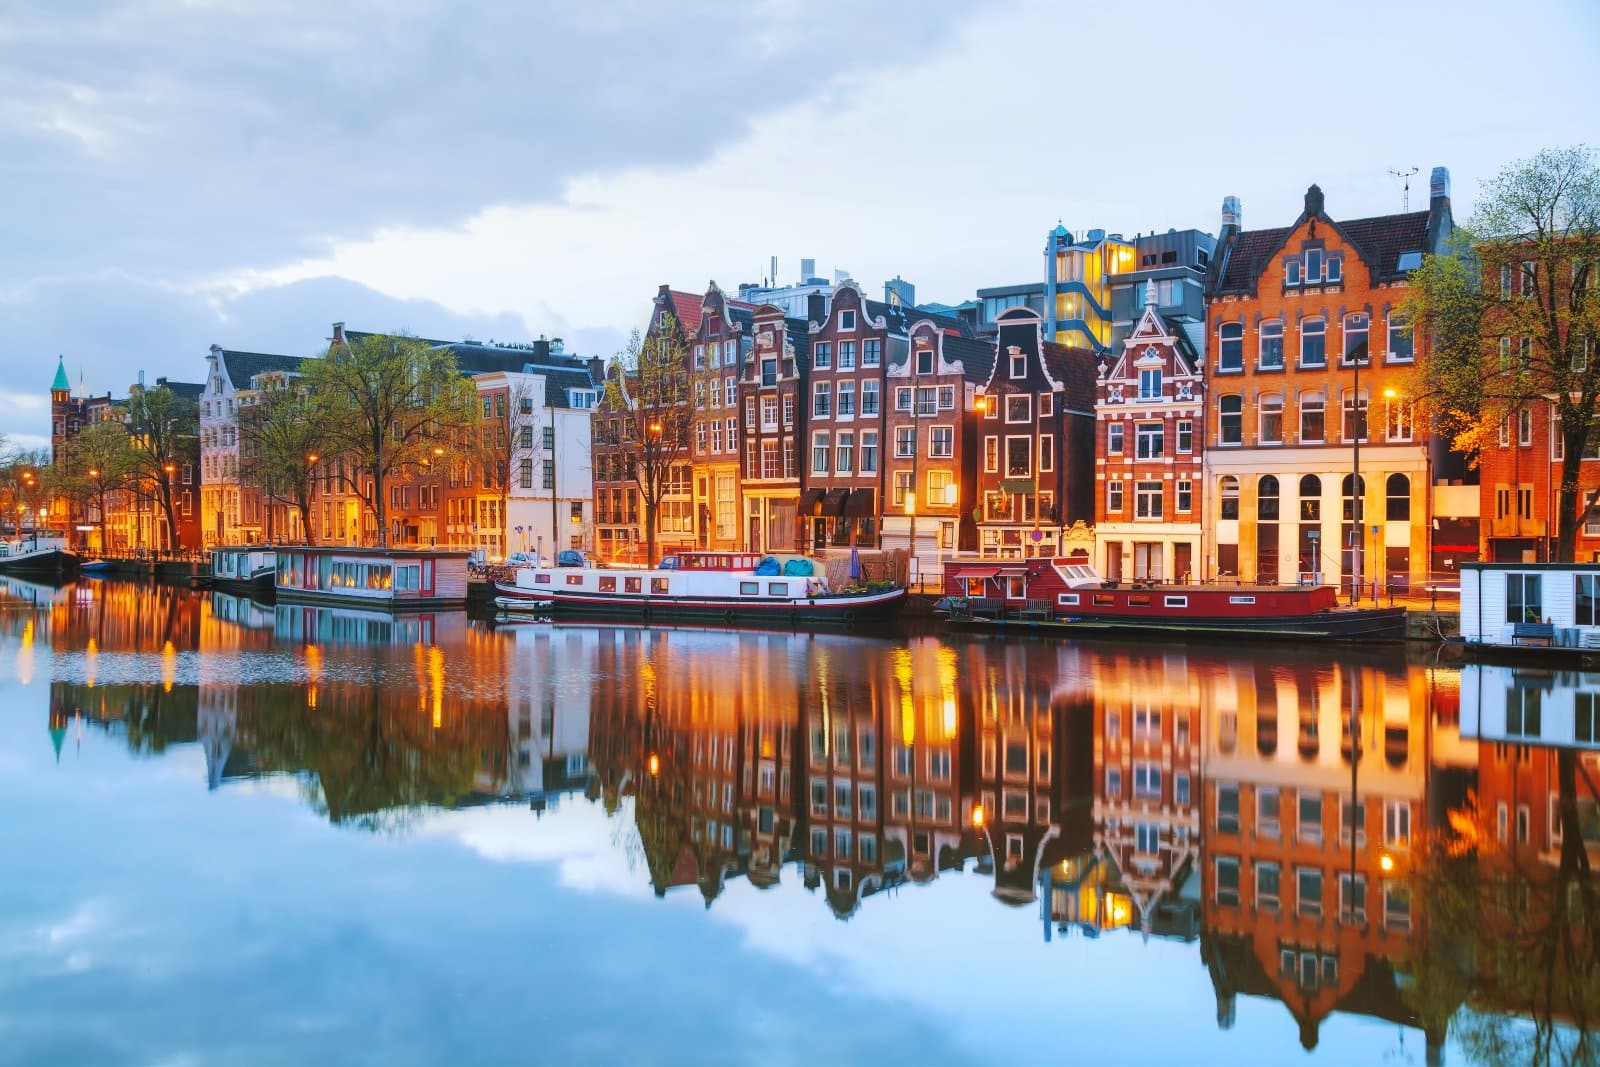 Image Credit: Shutterstock / photo.ua <p>Immerse yourself in Amsterdam’s laid-back atmosphere. Spend mornings cycling along picturesque canals, browsing flower markets, and sampling Dutch delicacies like stroopwafels and herring. Explore the city’s cultural scene with visits to museums like the Van Gogh Museum and Rijksmuseum and evenings enjoying live music in cozy cafes and bars.</p>